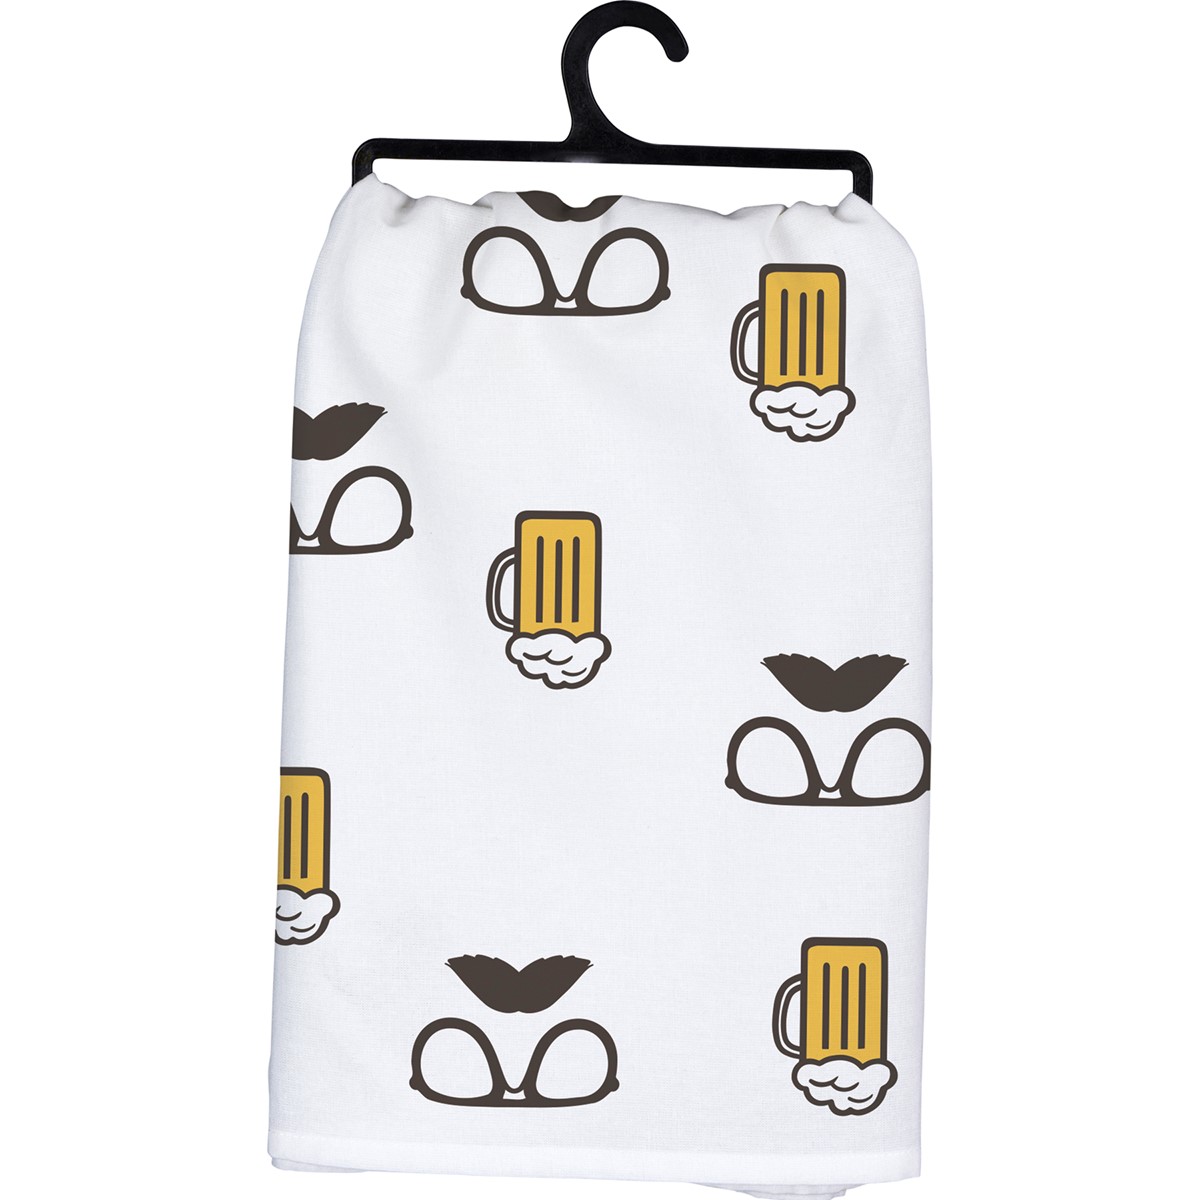 Awesome Dad Kitchen Towel - Cotton